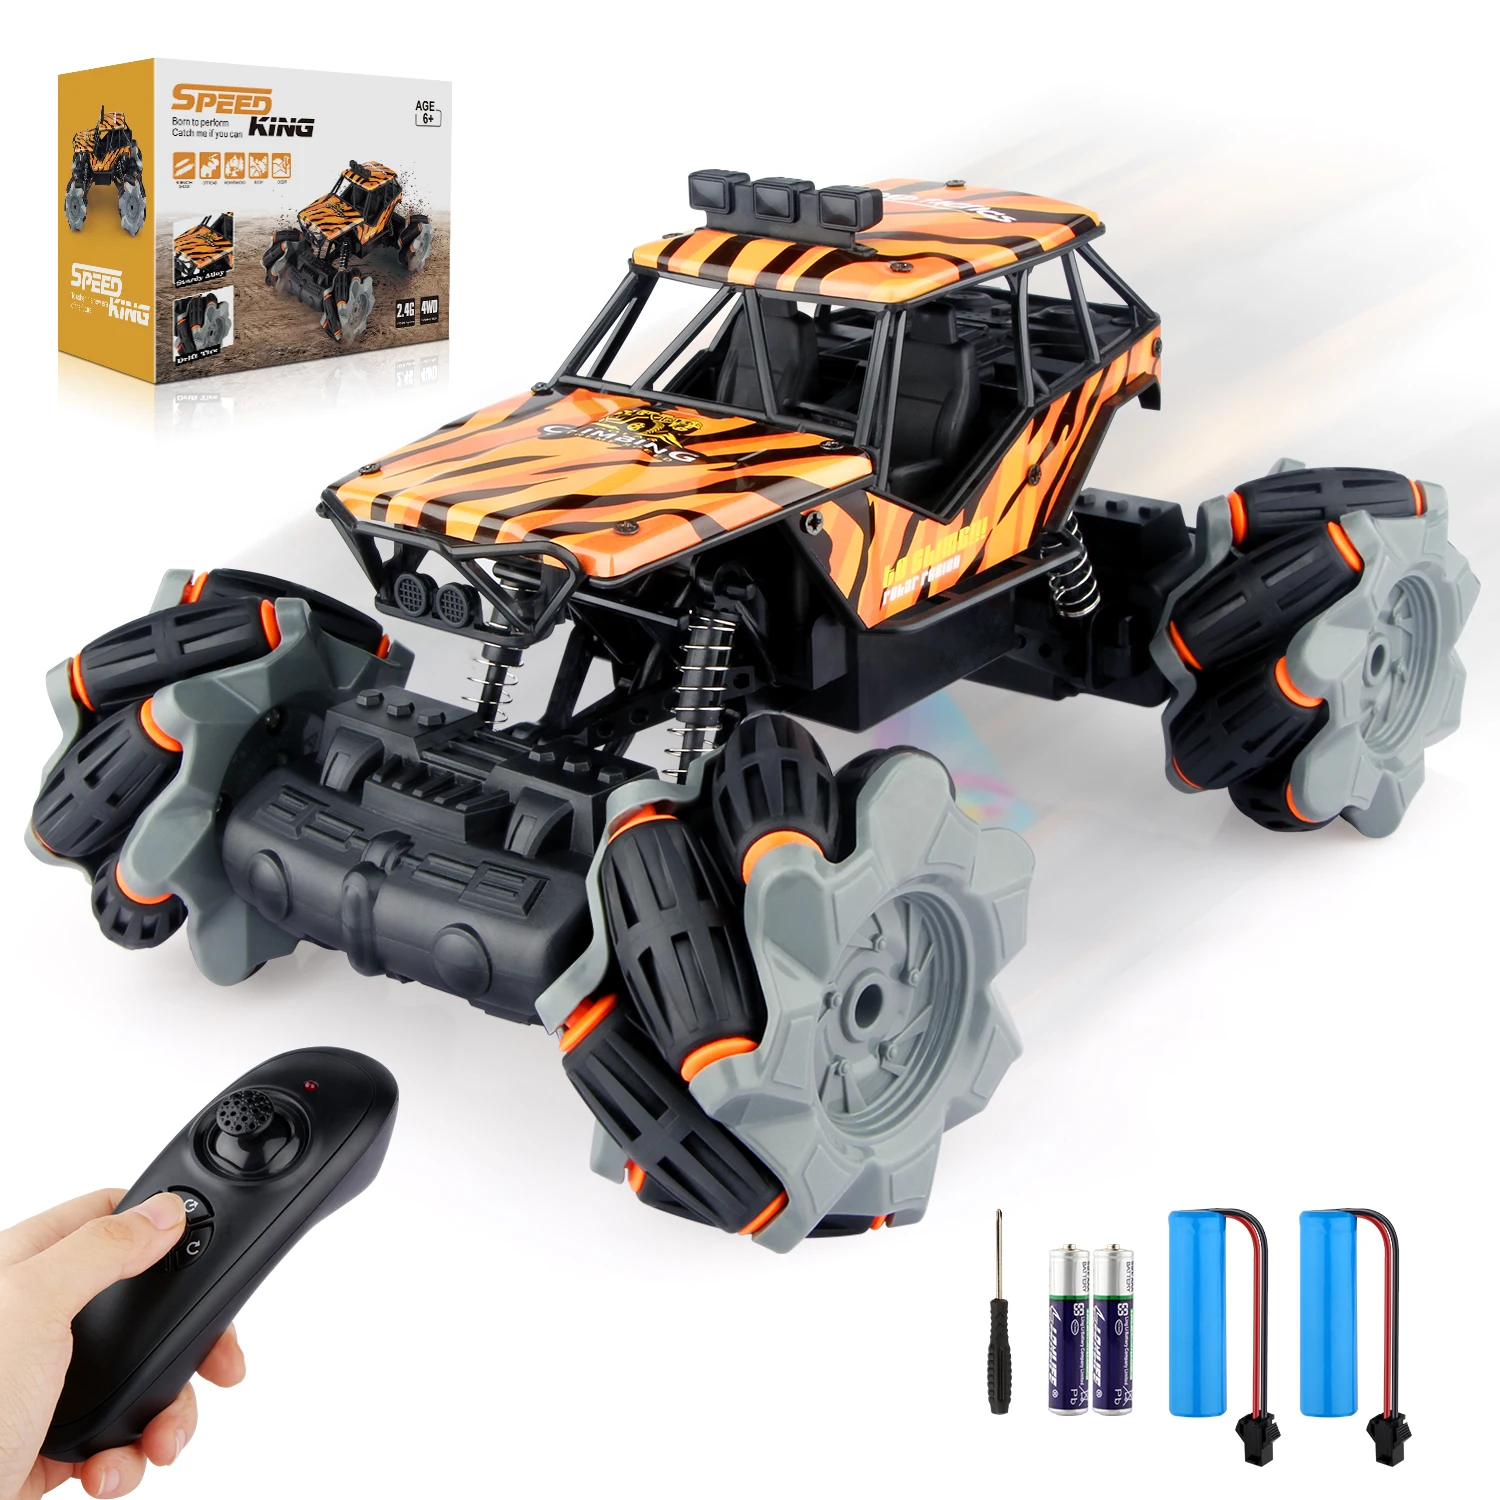 

4WD RC Cars, 20km/h High Speed Remote Control Car, 2.4GHz All Terrain Drift RC Monster Trucks 4x4 Off Road Car Toys Gift for Boy